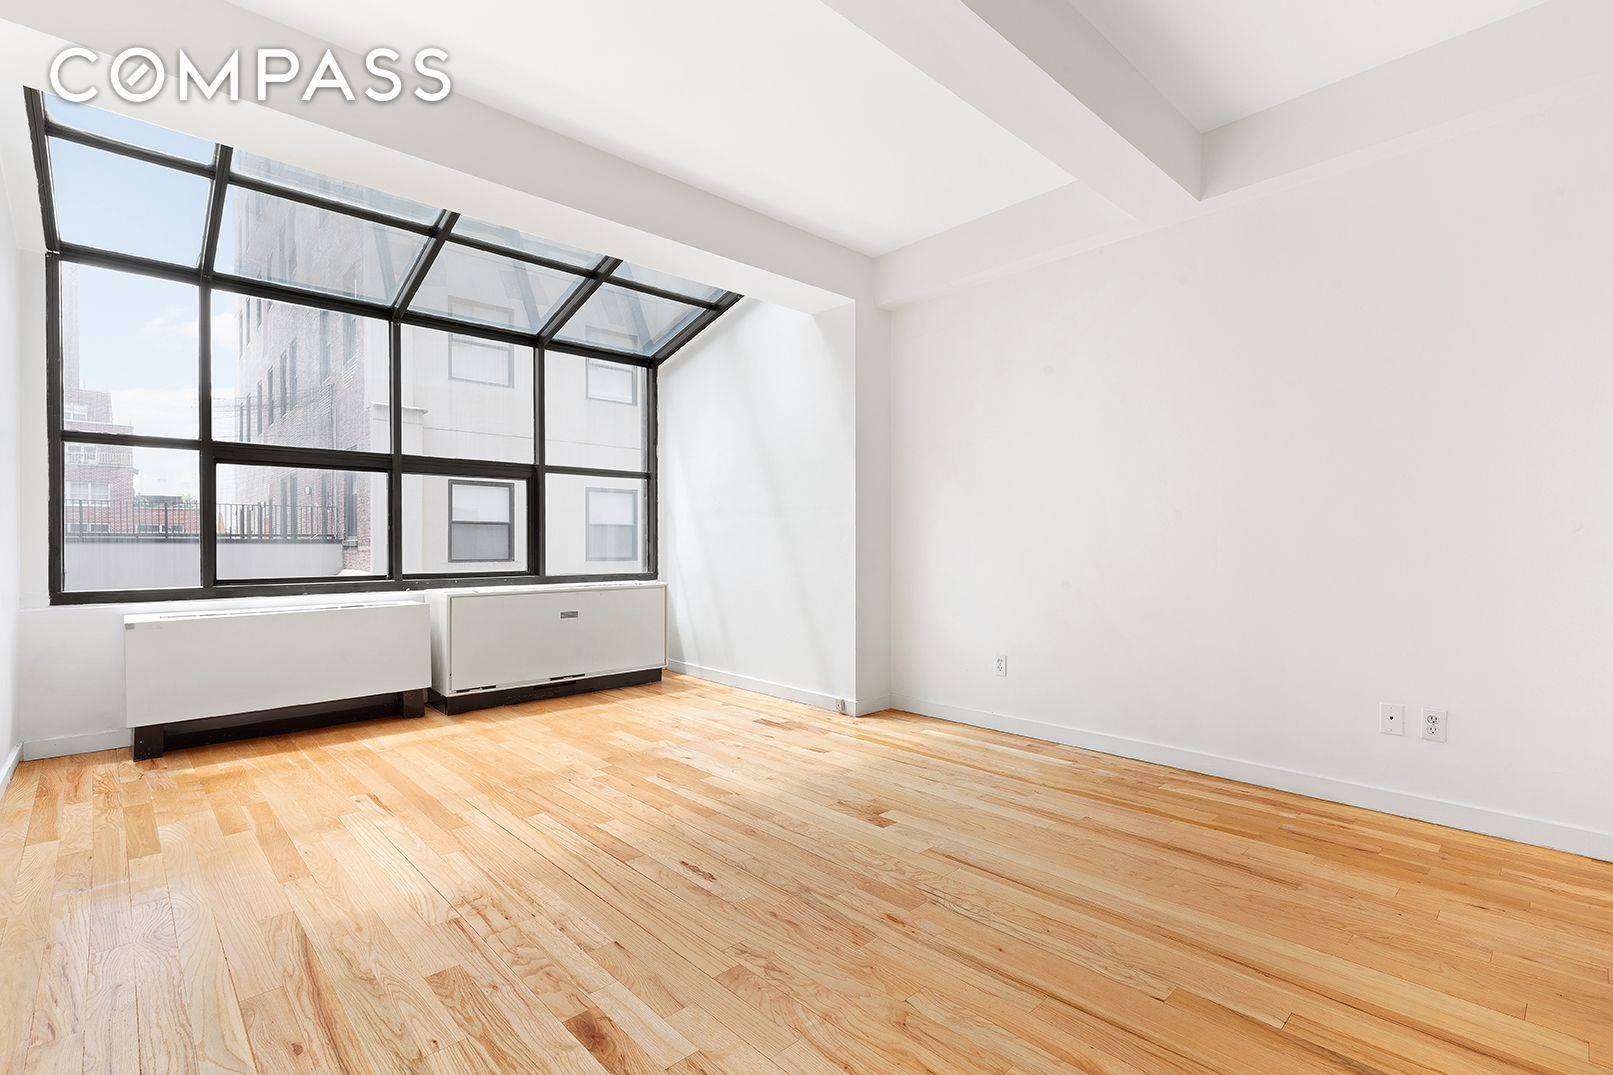 Located on the border of Chelsea amp ; Greenwich Village, this BRIGHT south facing 1 Bedroom apartment features a new stainless steel appliances, king sized bedroom and as atrium style ...